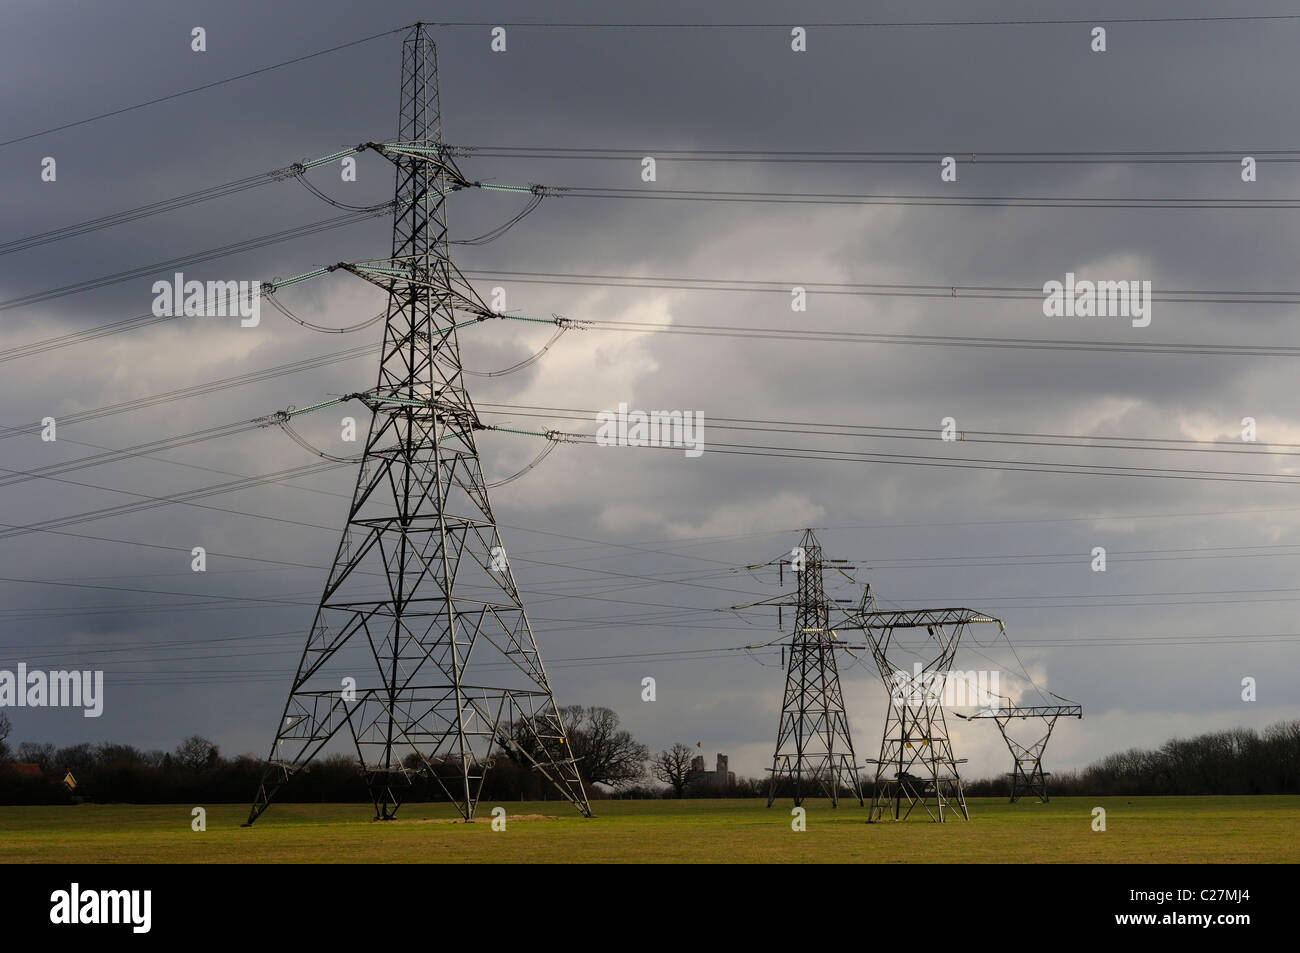 Electricity pylons and their power cables crossing a field beneath a dark cloudy sky. Stock Photo